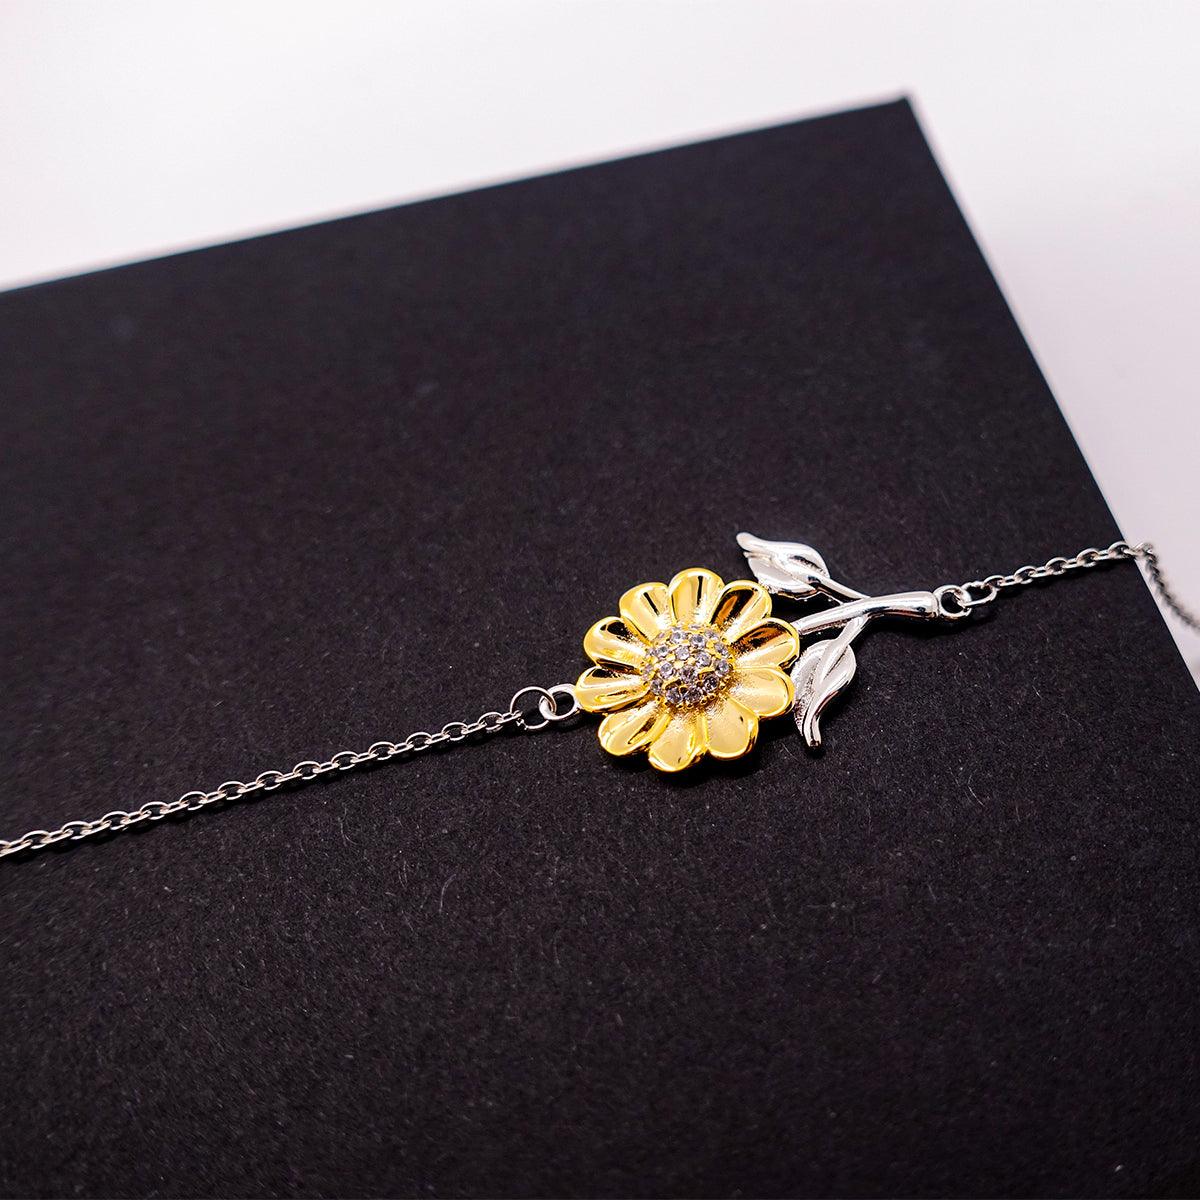 Girlfriend Gifts, To My Girlfriend Remember, you will never lose. You will either WIN or LEARN, Keepsake Sunflower Bracelet For Girlfriend Card, Birthday Christmas Gifts Ideas For Girlfriend X-mas Gifts